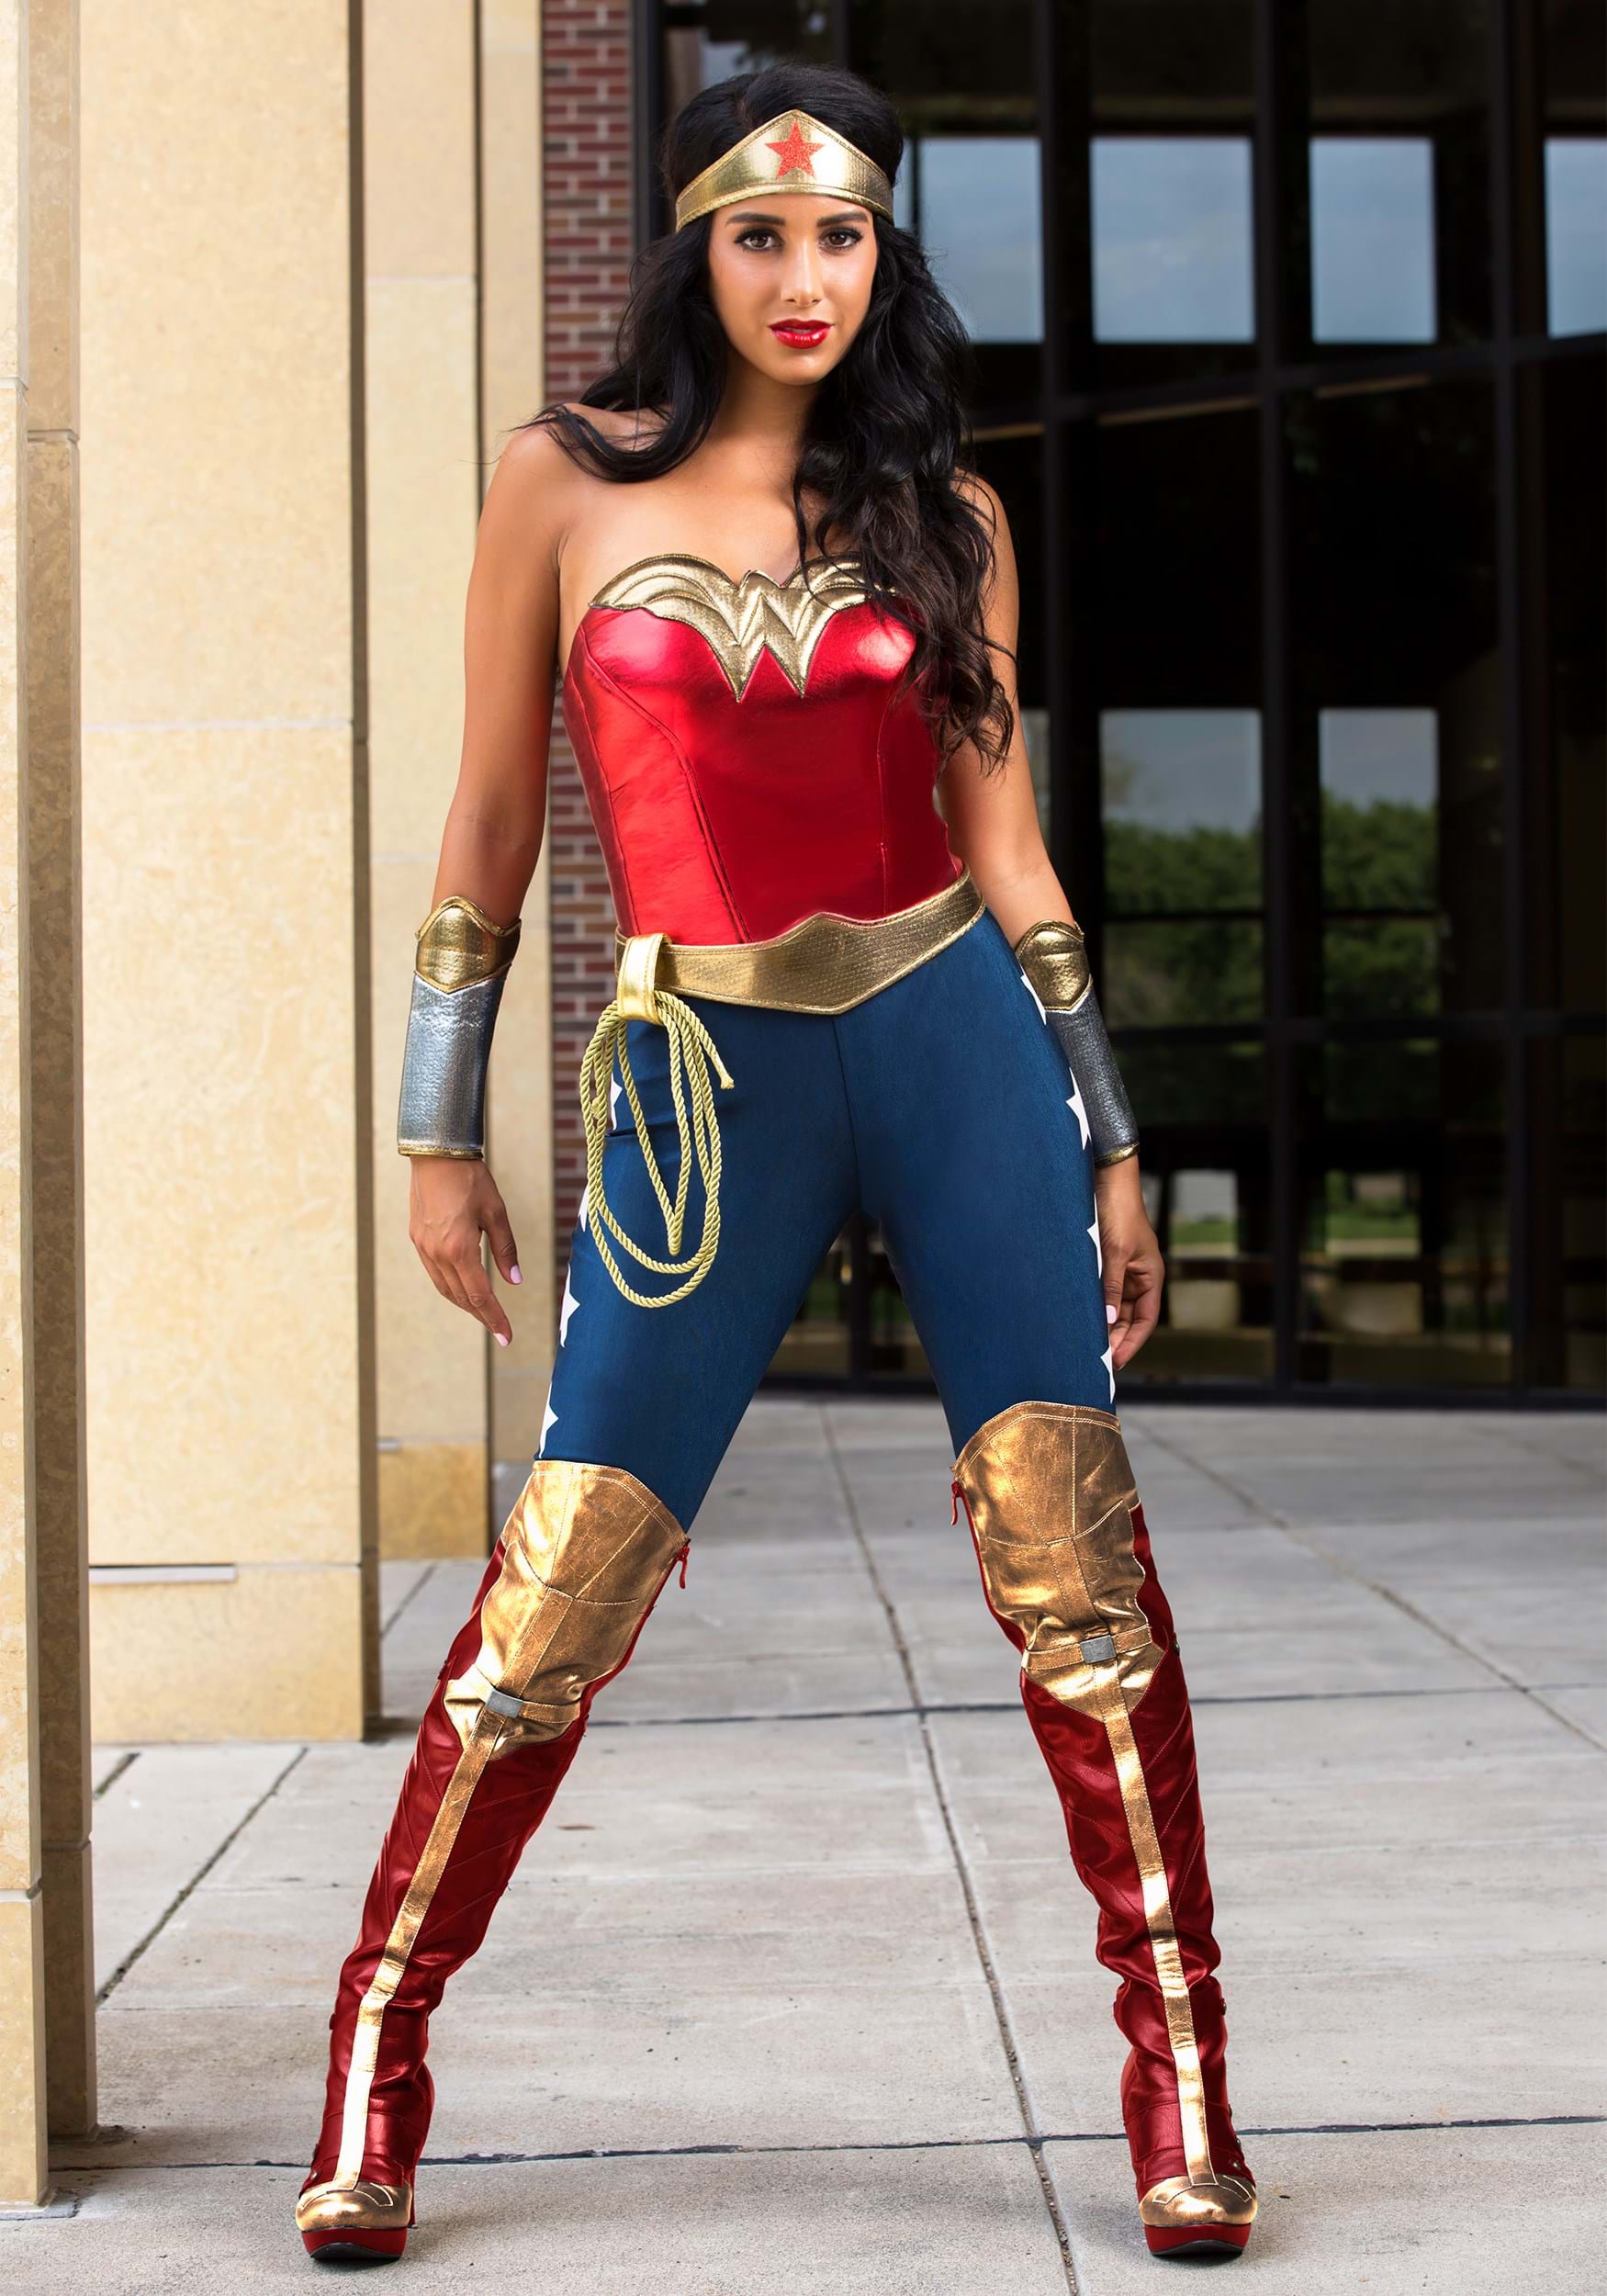 https://images.halloweencostumes.ca/products/43505/1-1/adult-dc-wonder-woman-costume.jpg